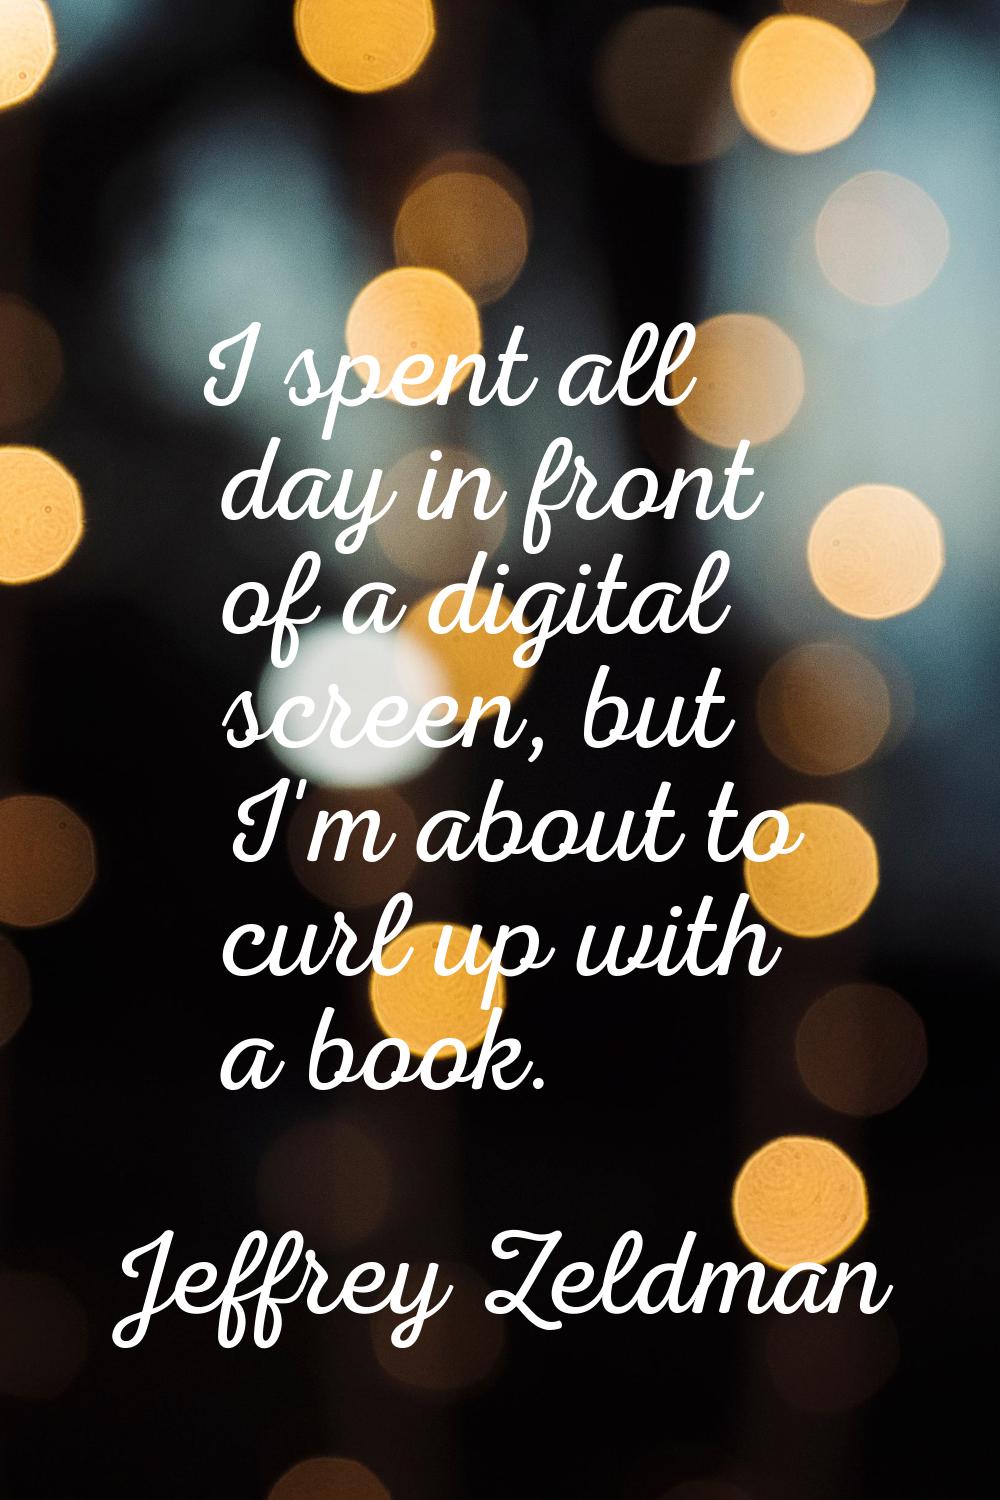 I spent all day in front of a digital screen, but I'm about to curl up with a book.